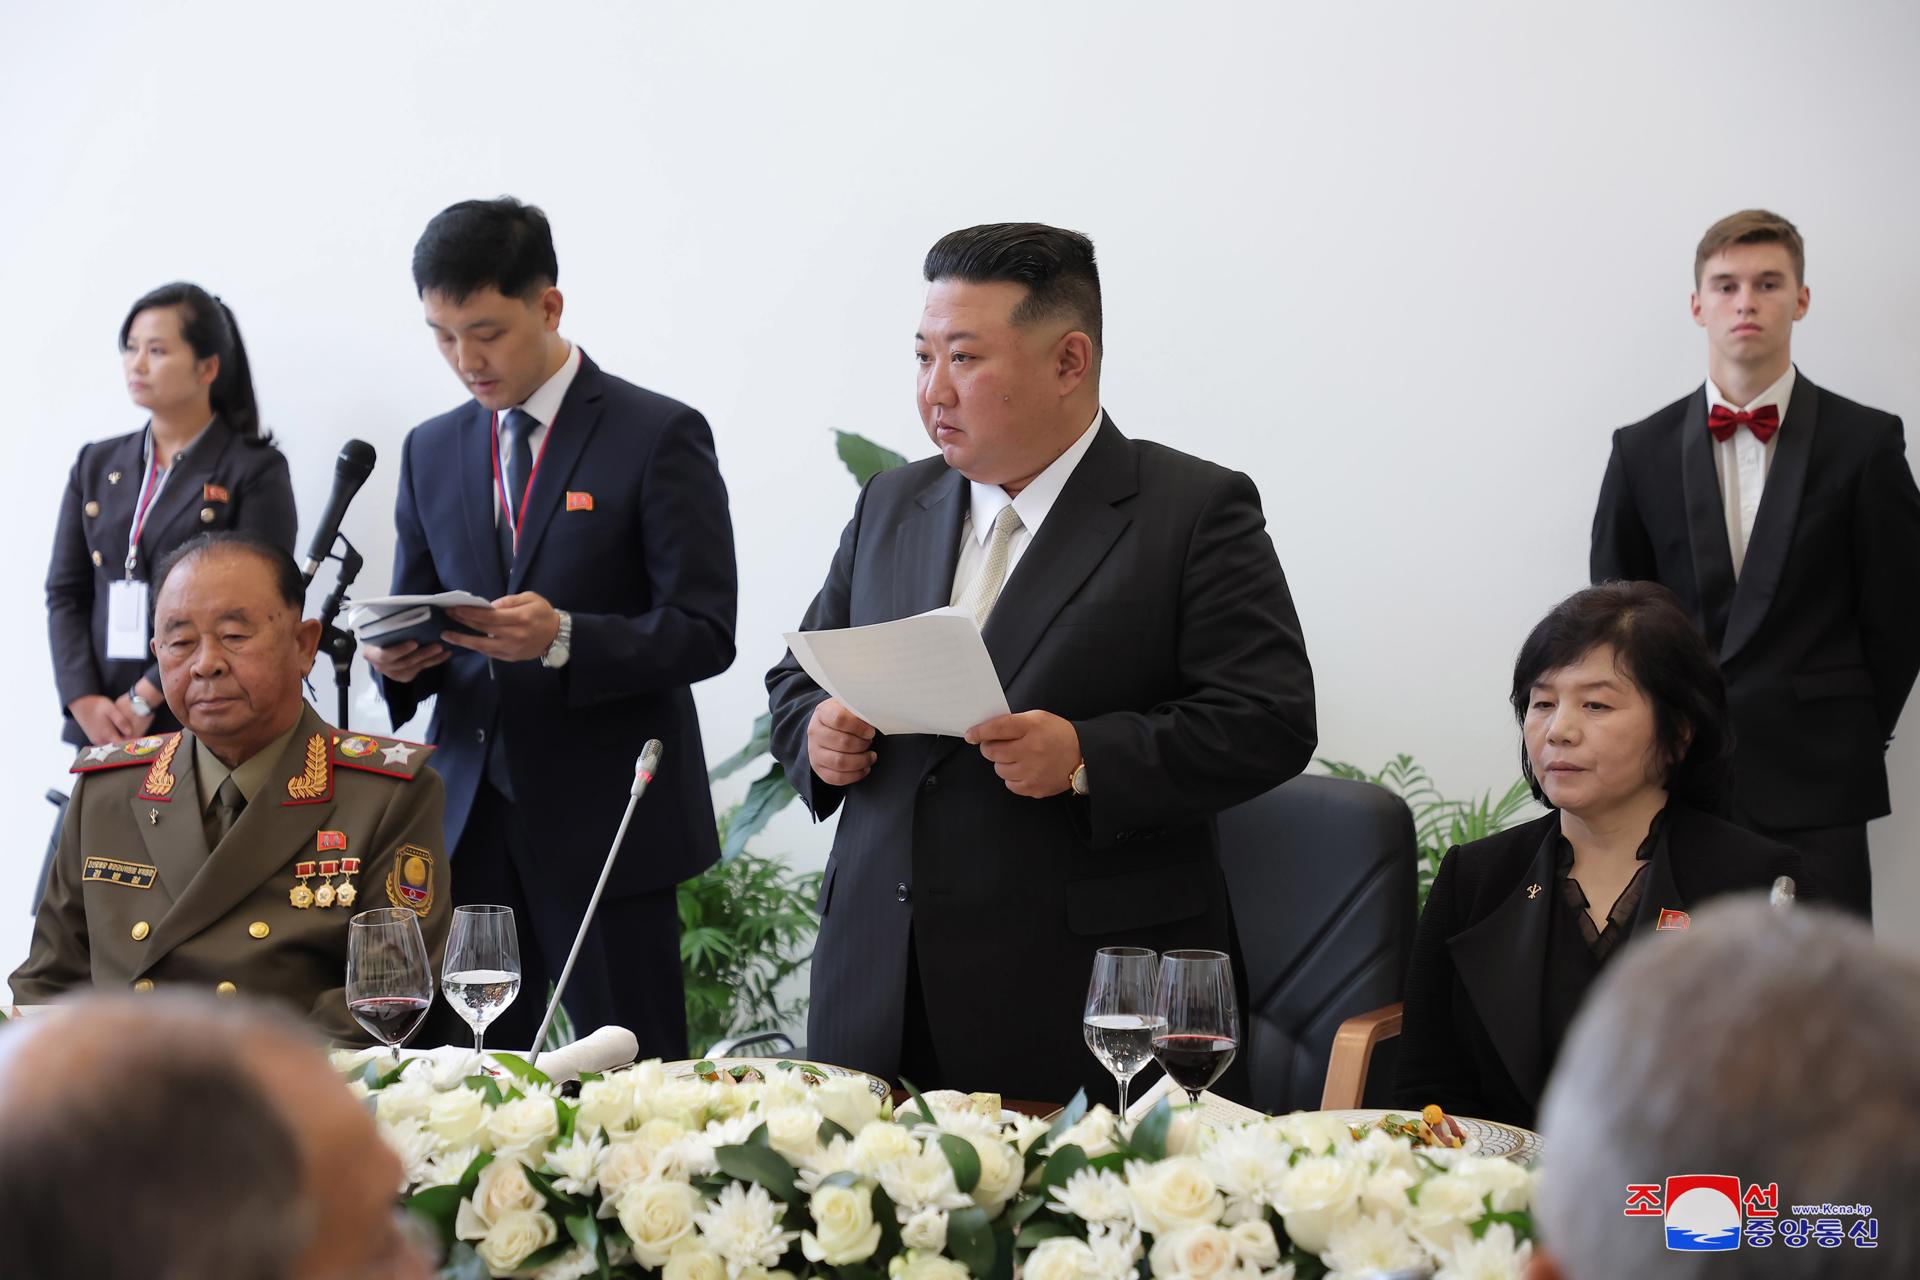 A photo released by the official North Korean Central News Agency (KCNA) shows North Korean leader Kim Jong Un (C) delivering a speech during a banquet with Russian President Vladimir Putin and other Russian officials (not pictured) in Russia, 13 September 2023 (issued 14 September 2023). EFE/EPA/KCNA EDITORIAL USE ONLY
